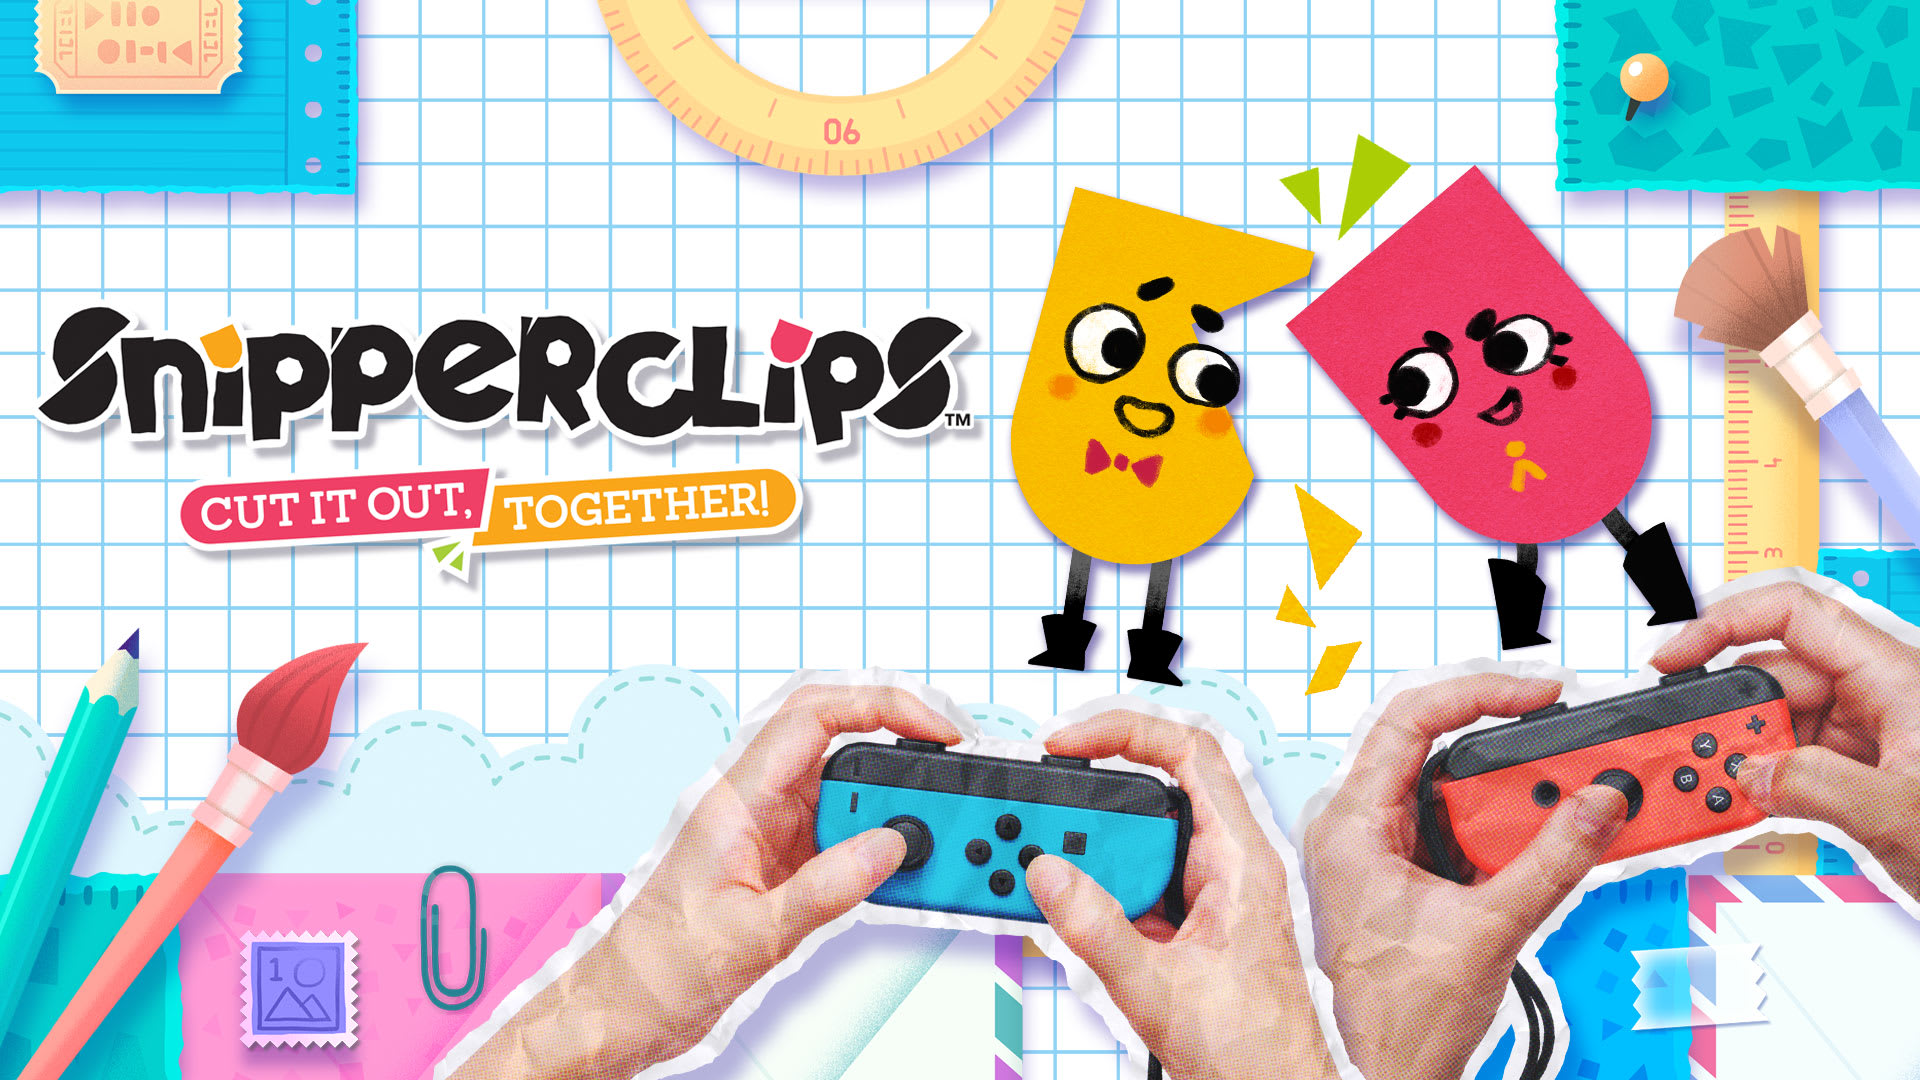 Snipperclips™ – Cut it out, together! DLC 